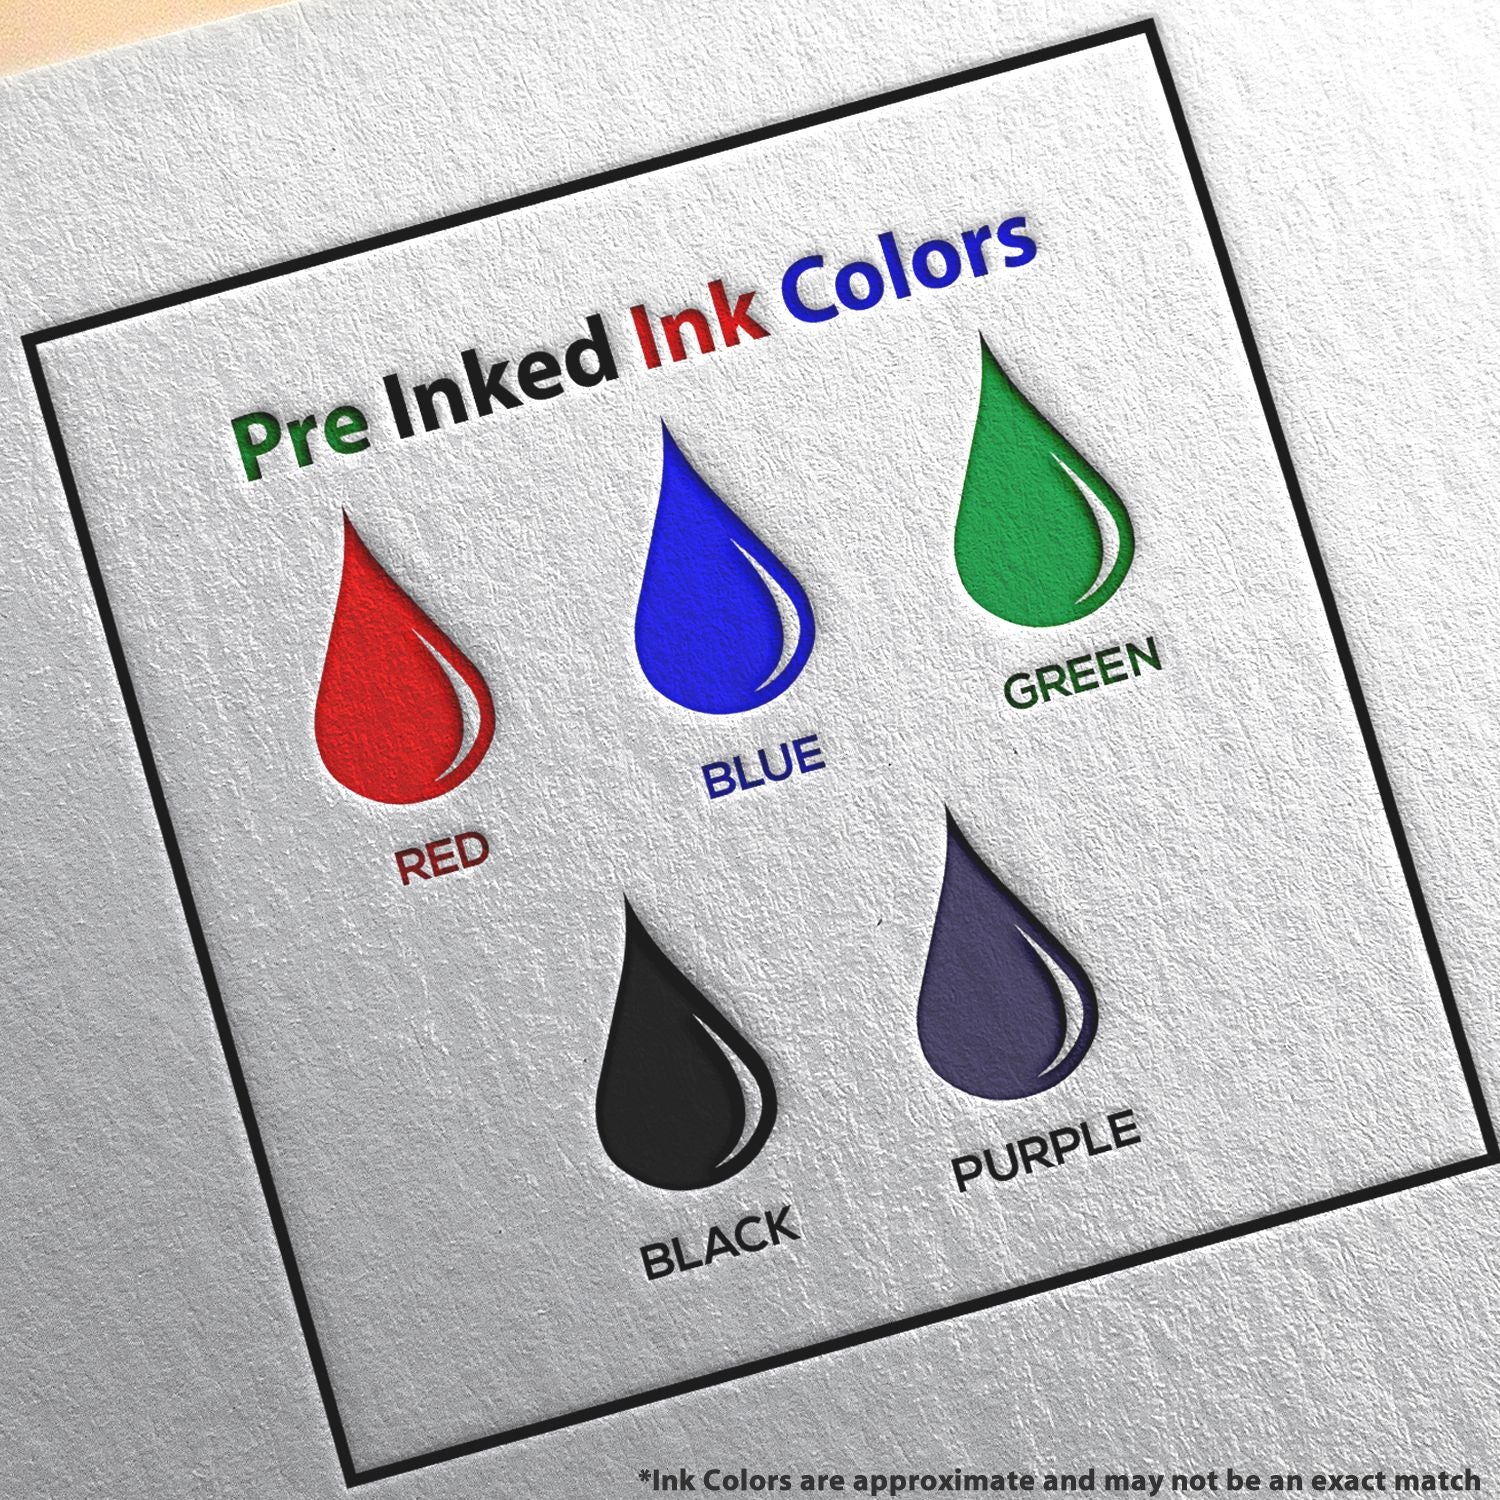 A picture showing the different ink colors or hues available for the Premium MaxLight Pre-Inked District of Columbia Engineering Stamp product.